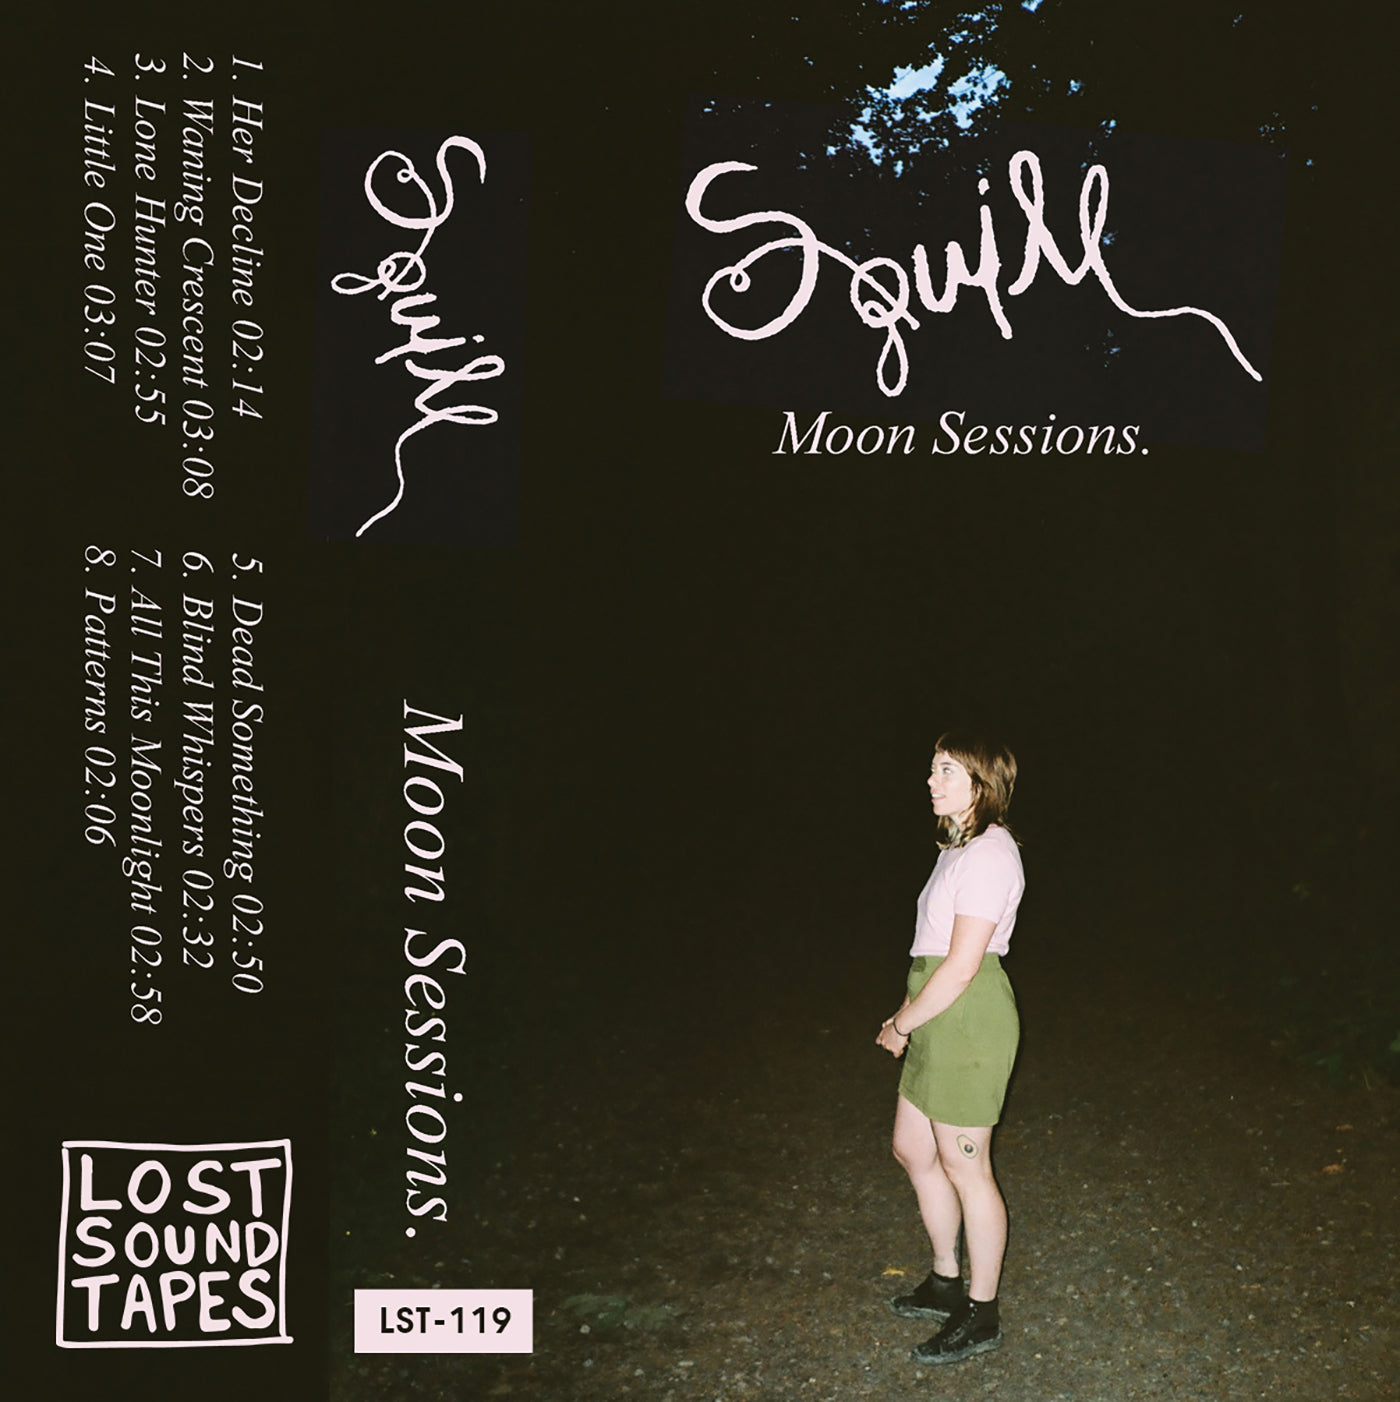 SQUILL "Moon Sessions" cassette tape